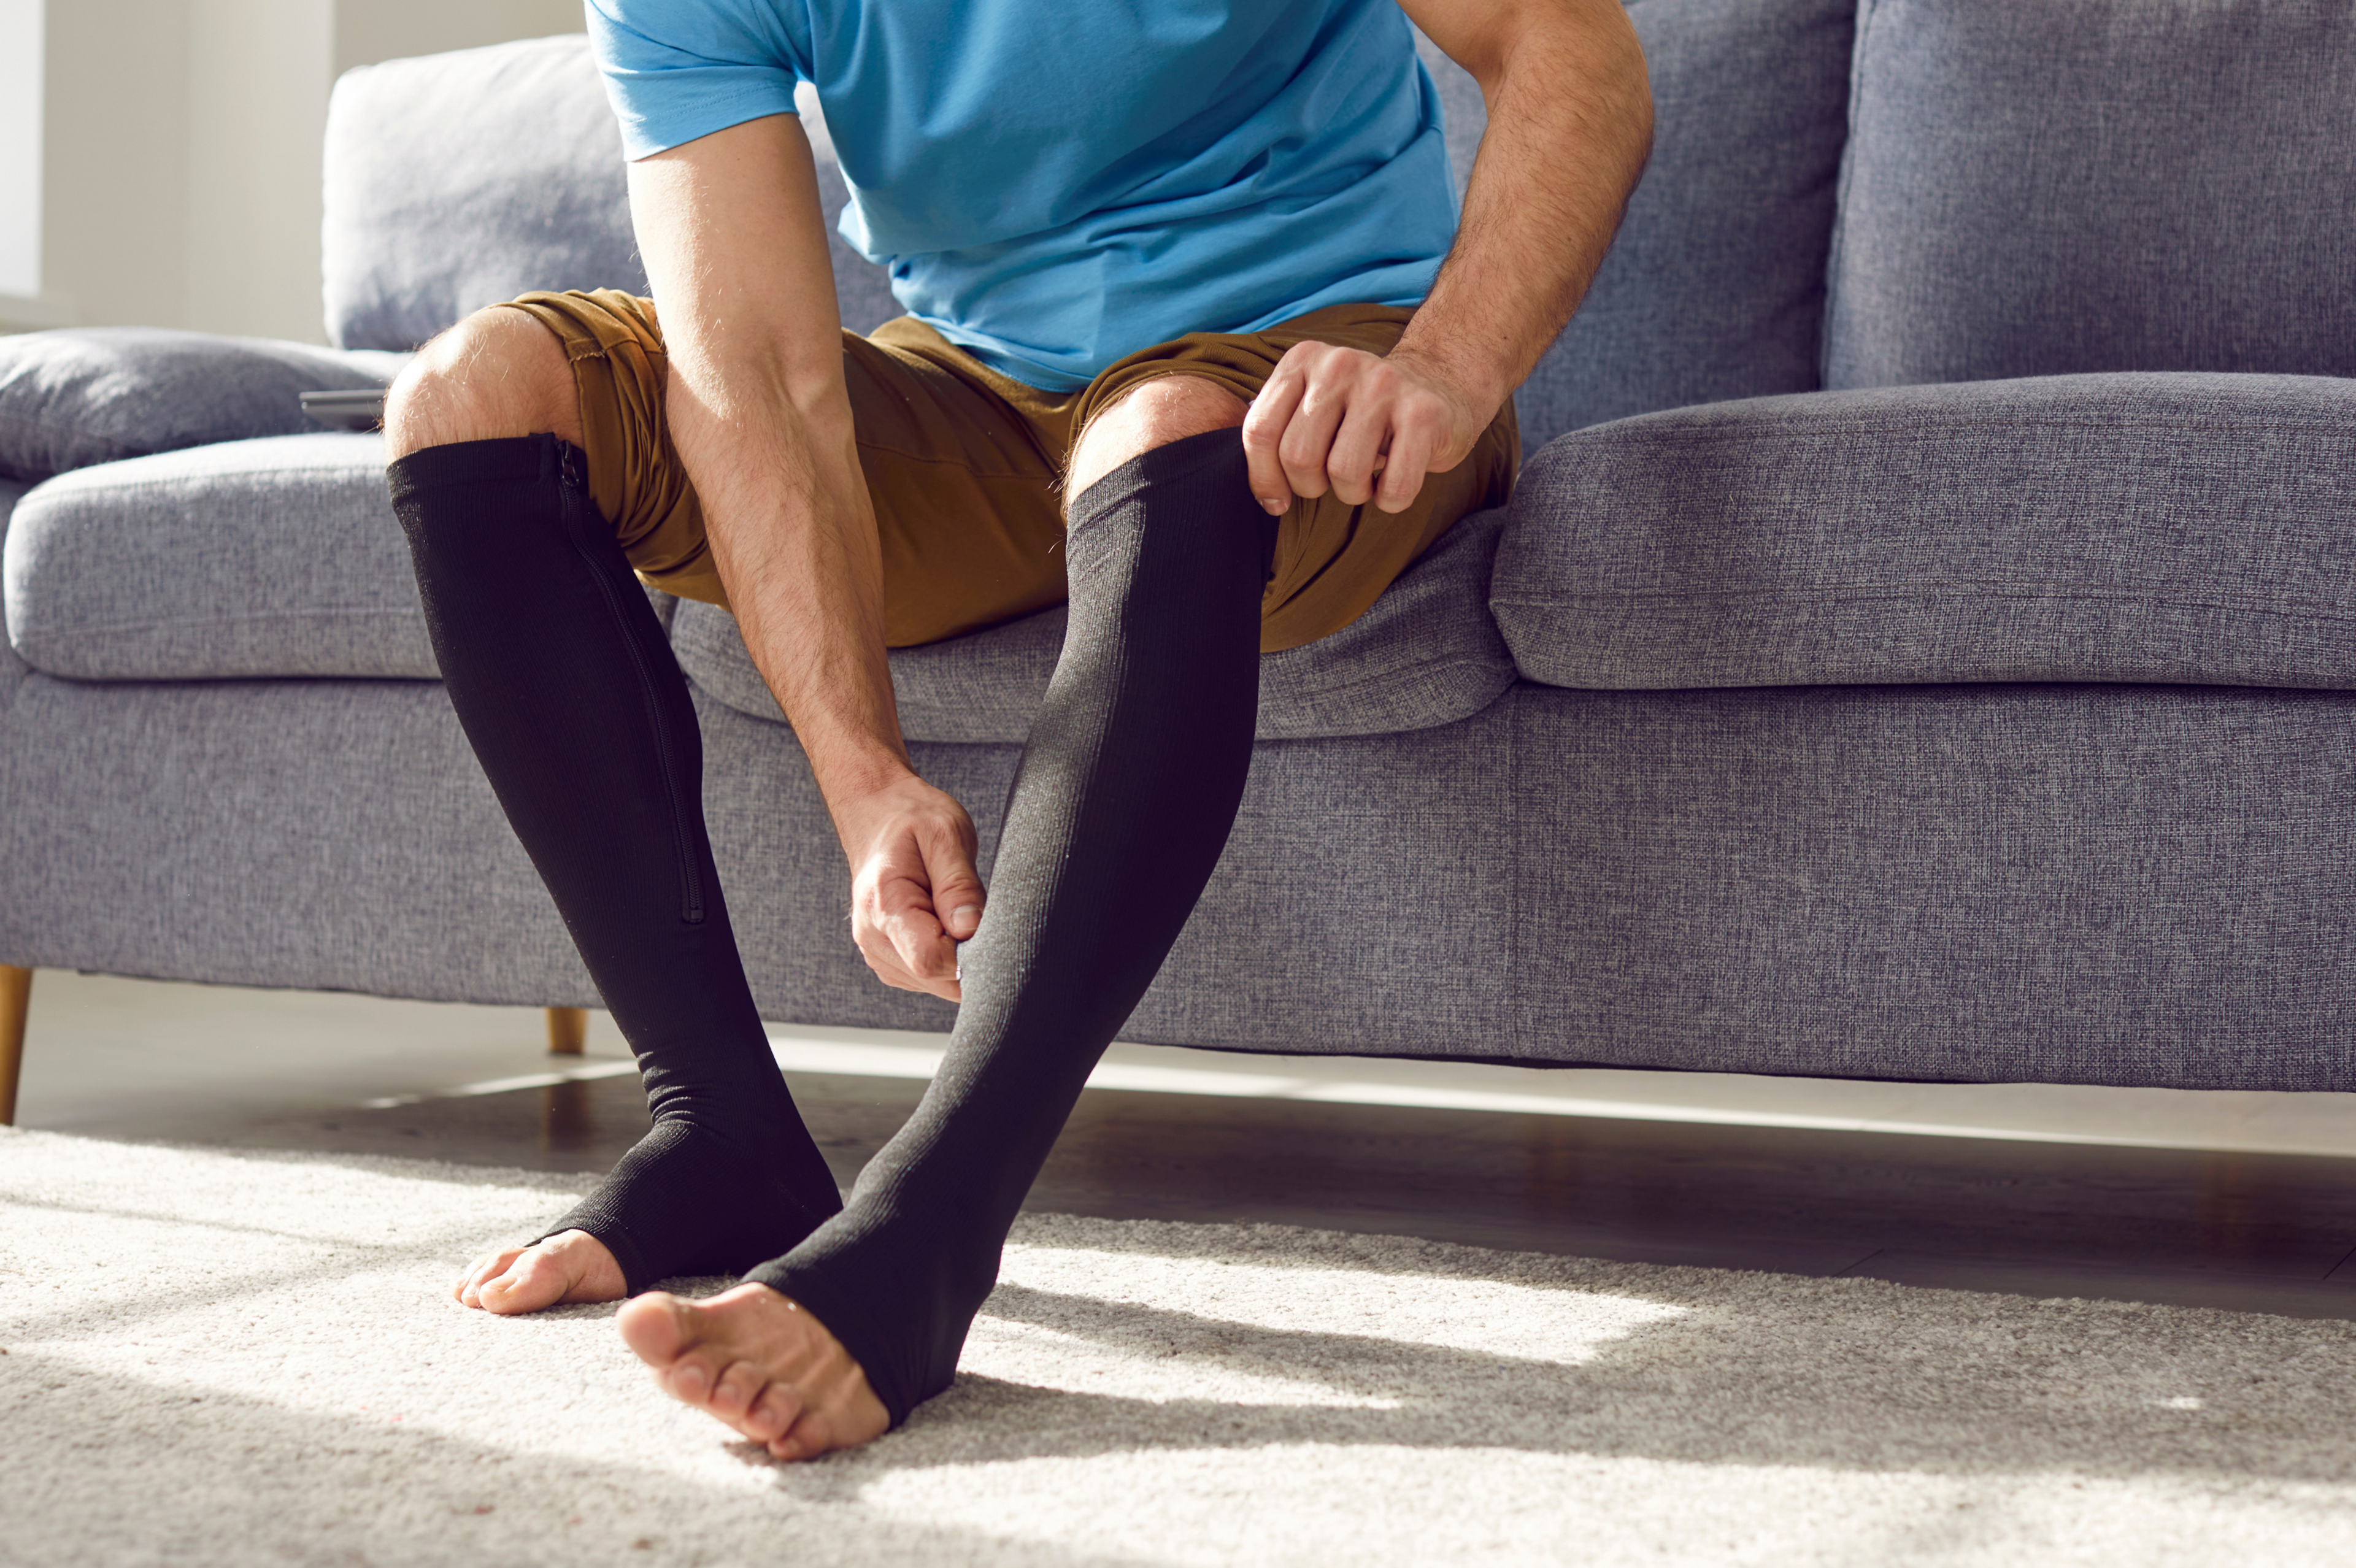 By improving your circulation, compression sleeves improve calf strain healing and running performance.